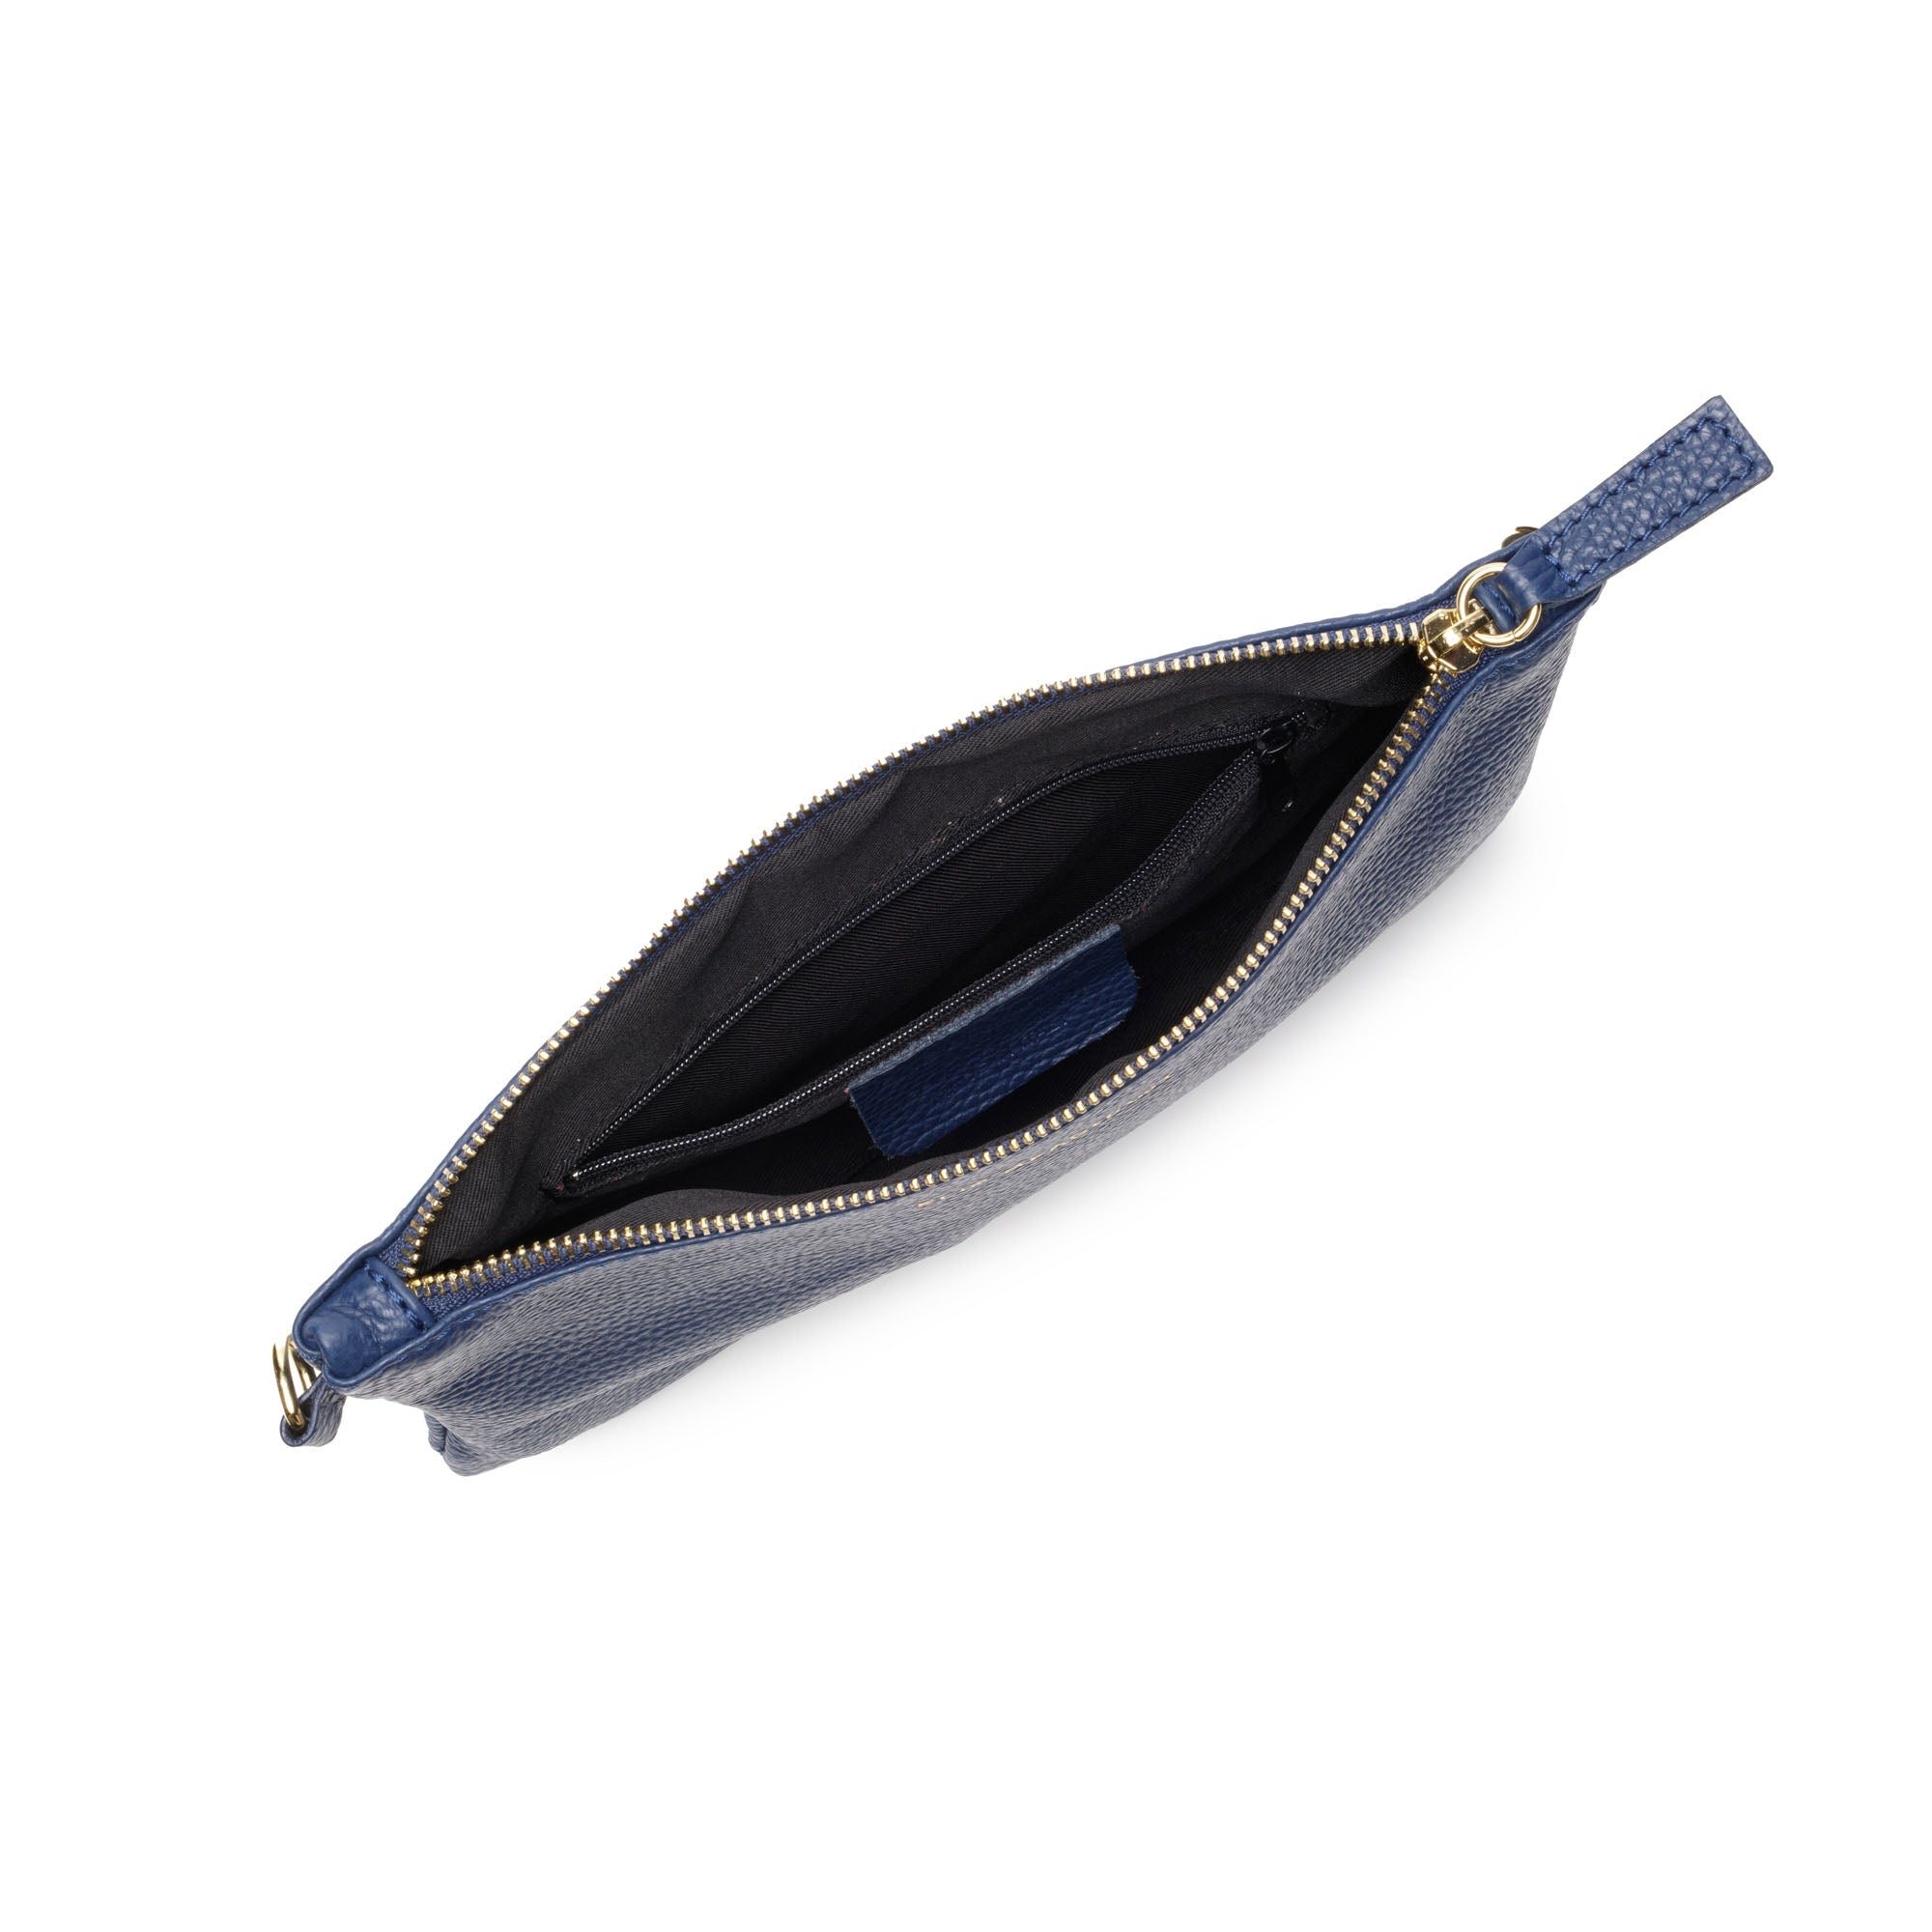 Pouch Bag Navy